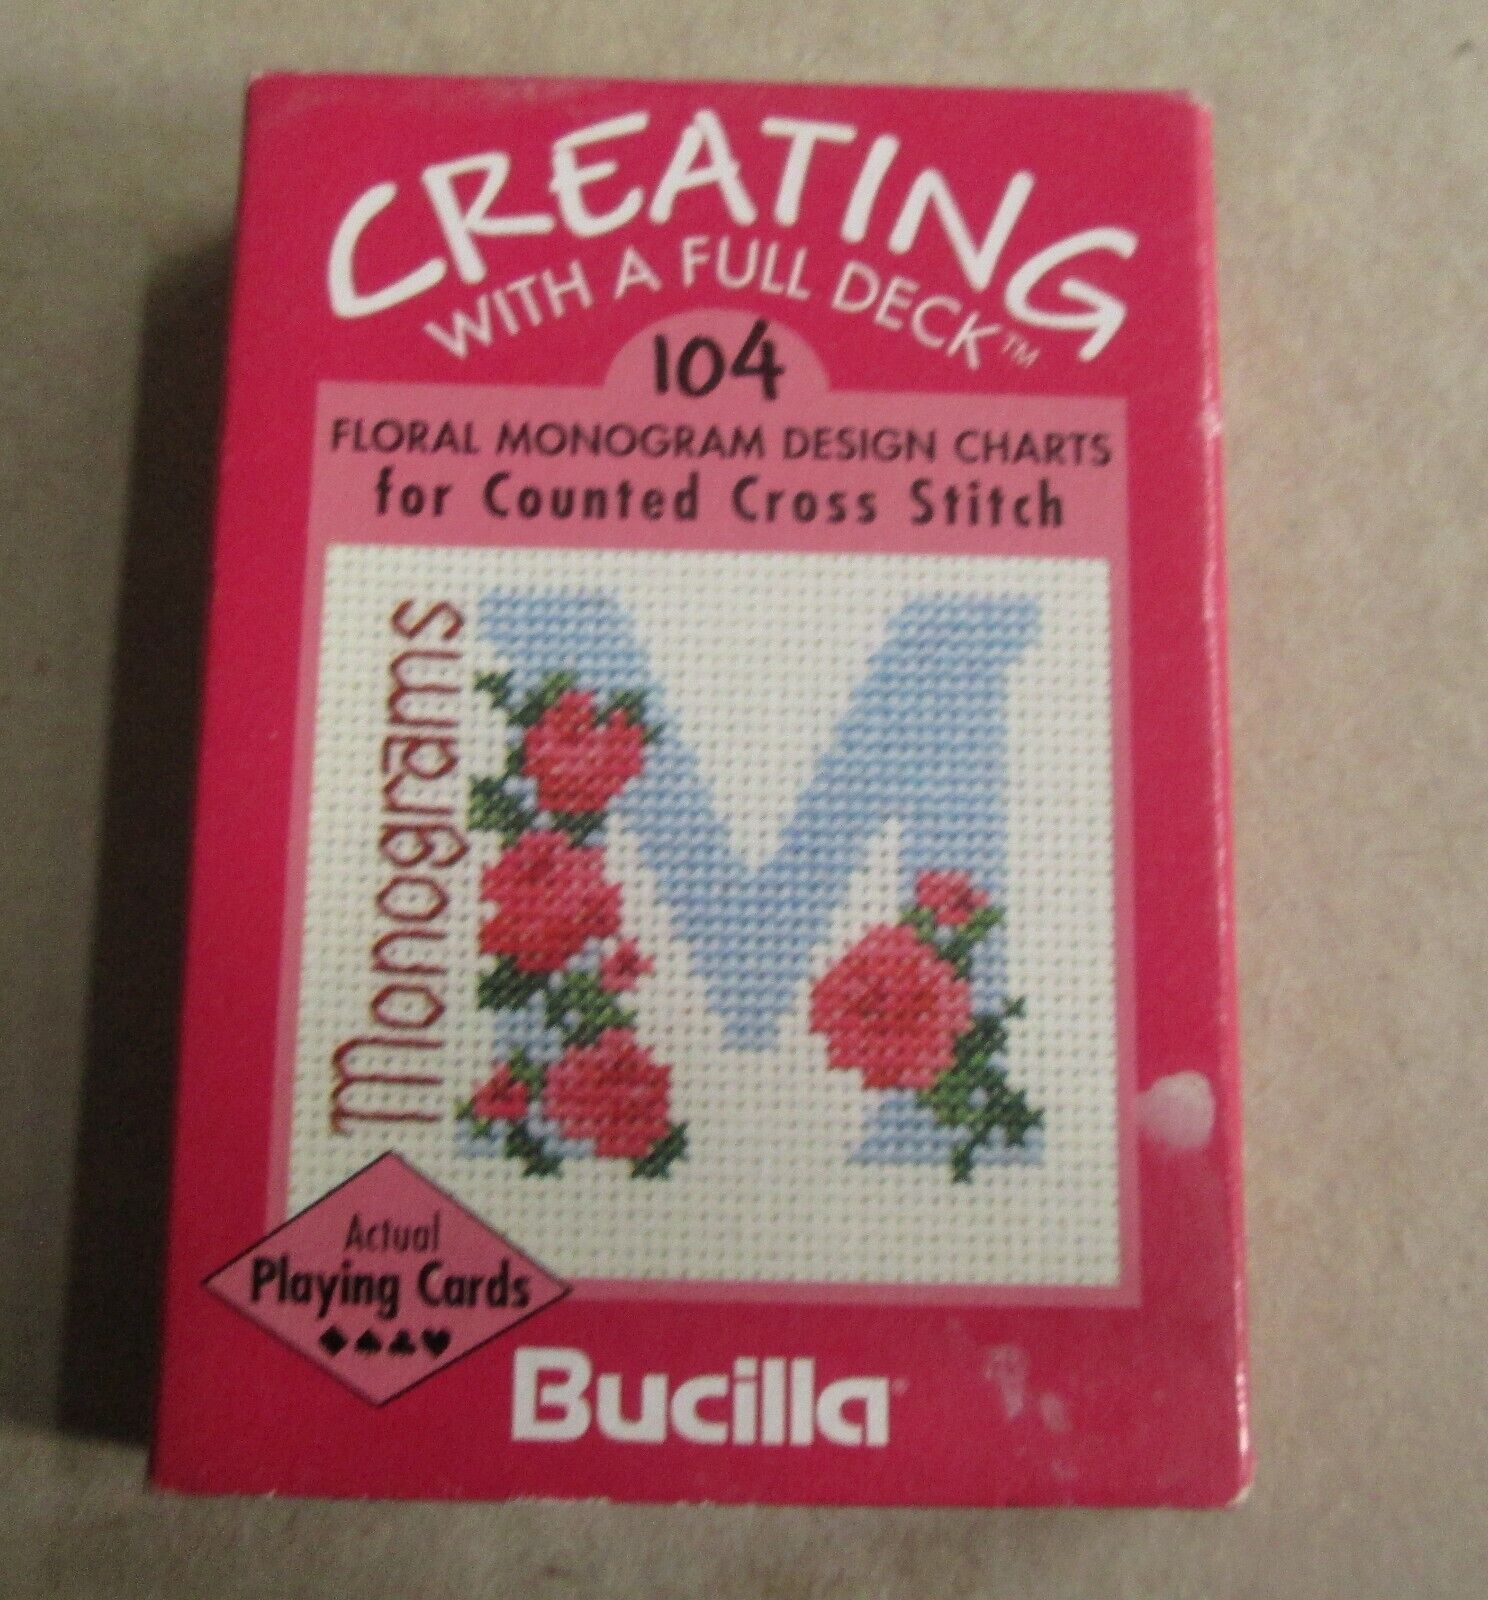 Bucilla Floral Monogram Design Charts Counted Cross Stitch Playing Cards New